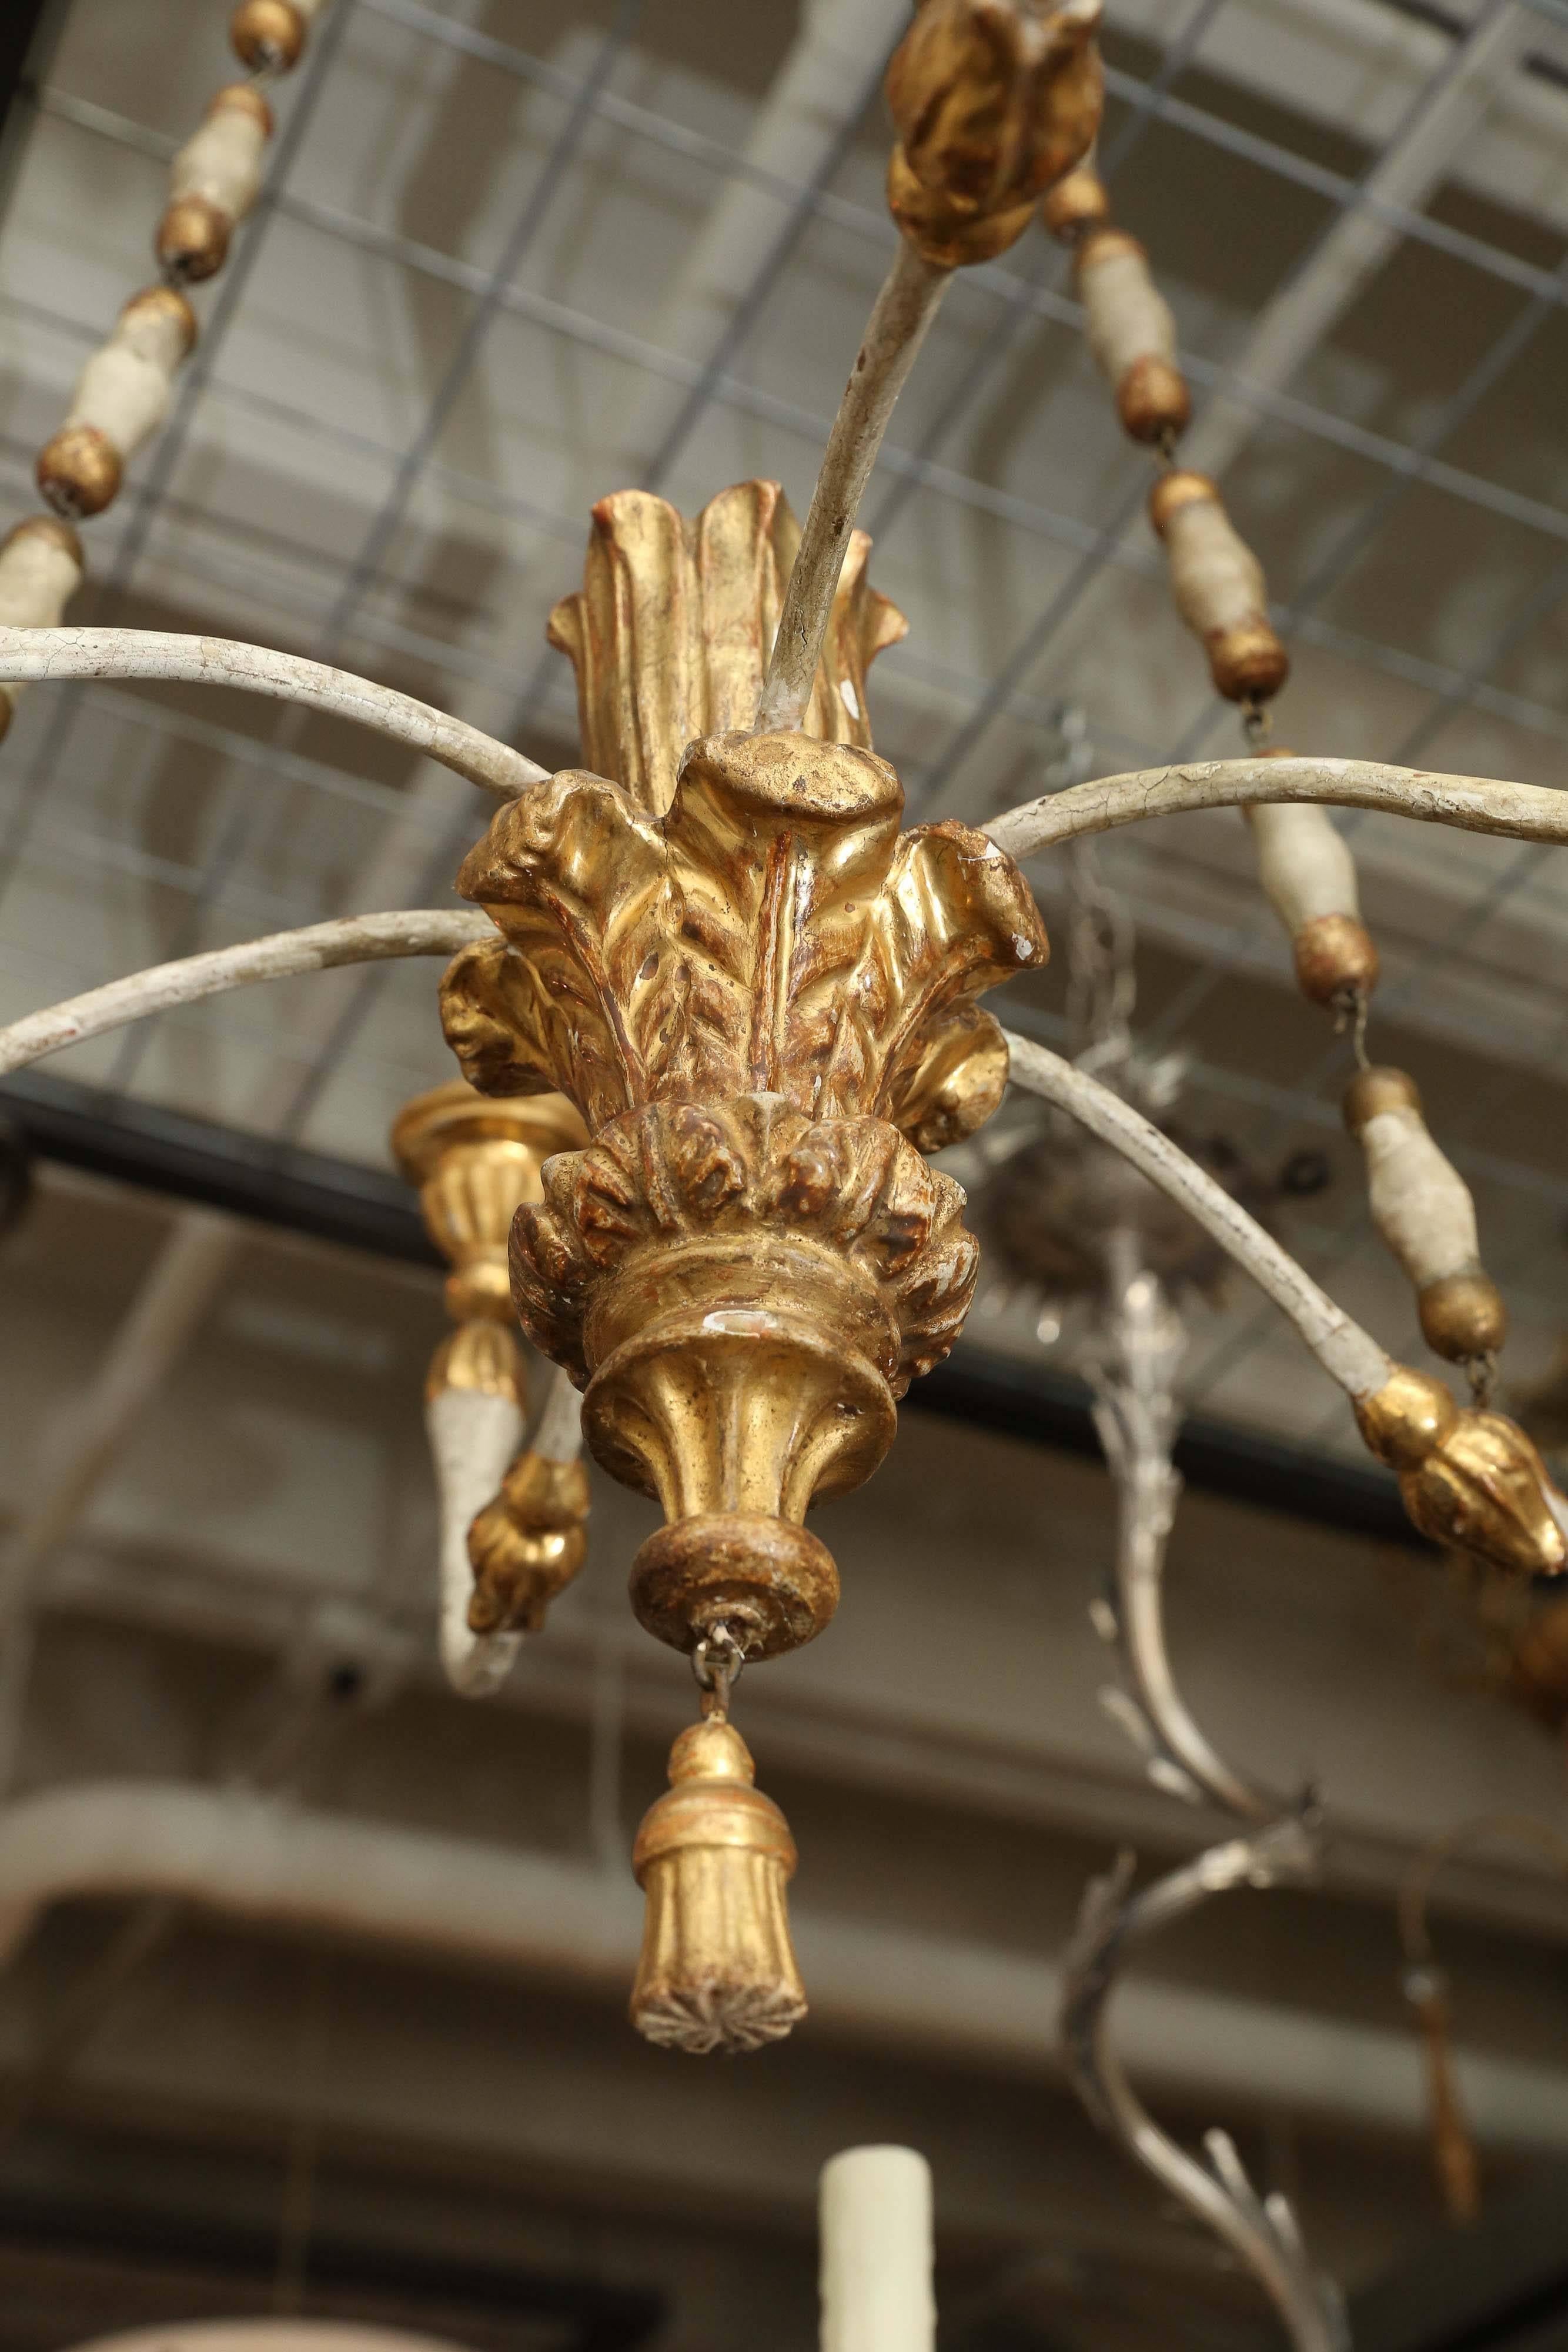 18th century painted and gilt Venetian chandelier from a dealer's home. Made with beautiful fragment details and proportions. Ready to use with candles.